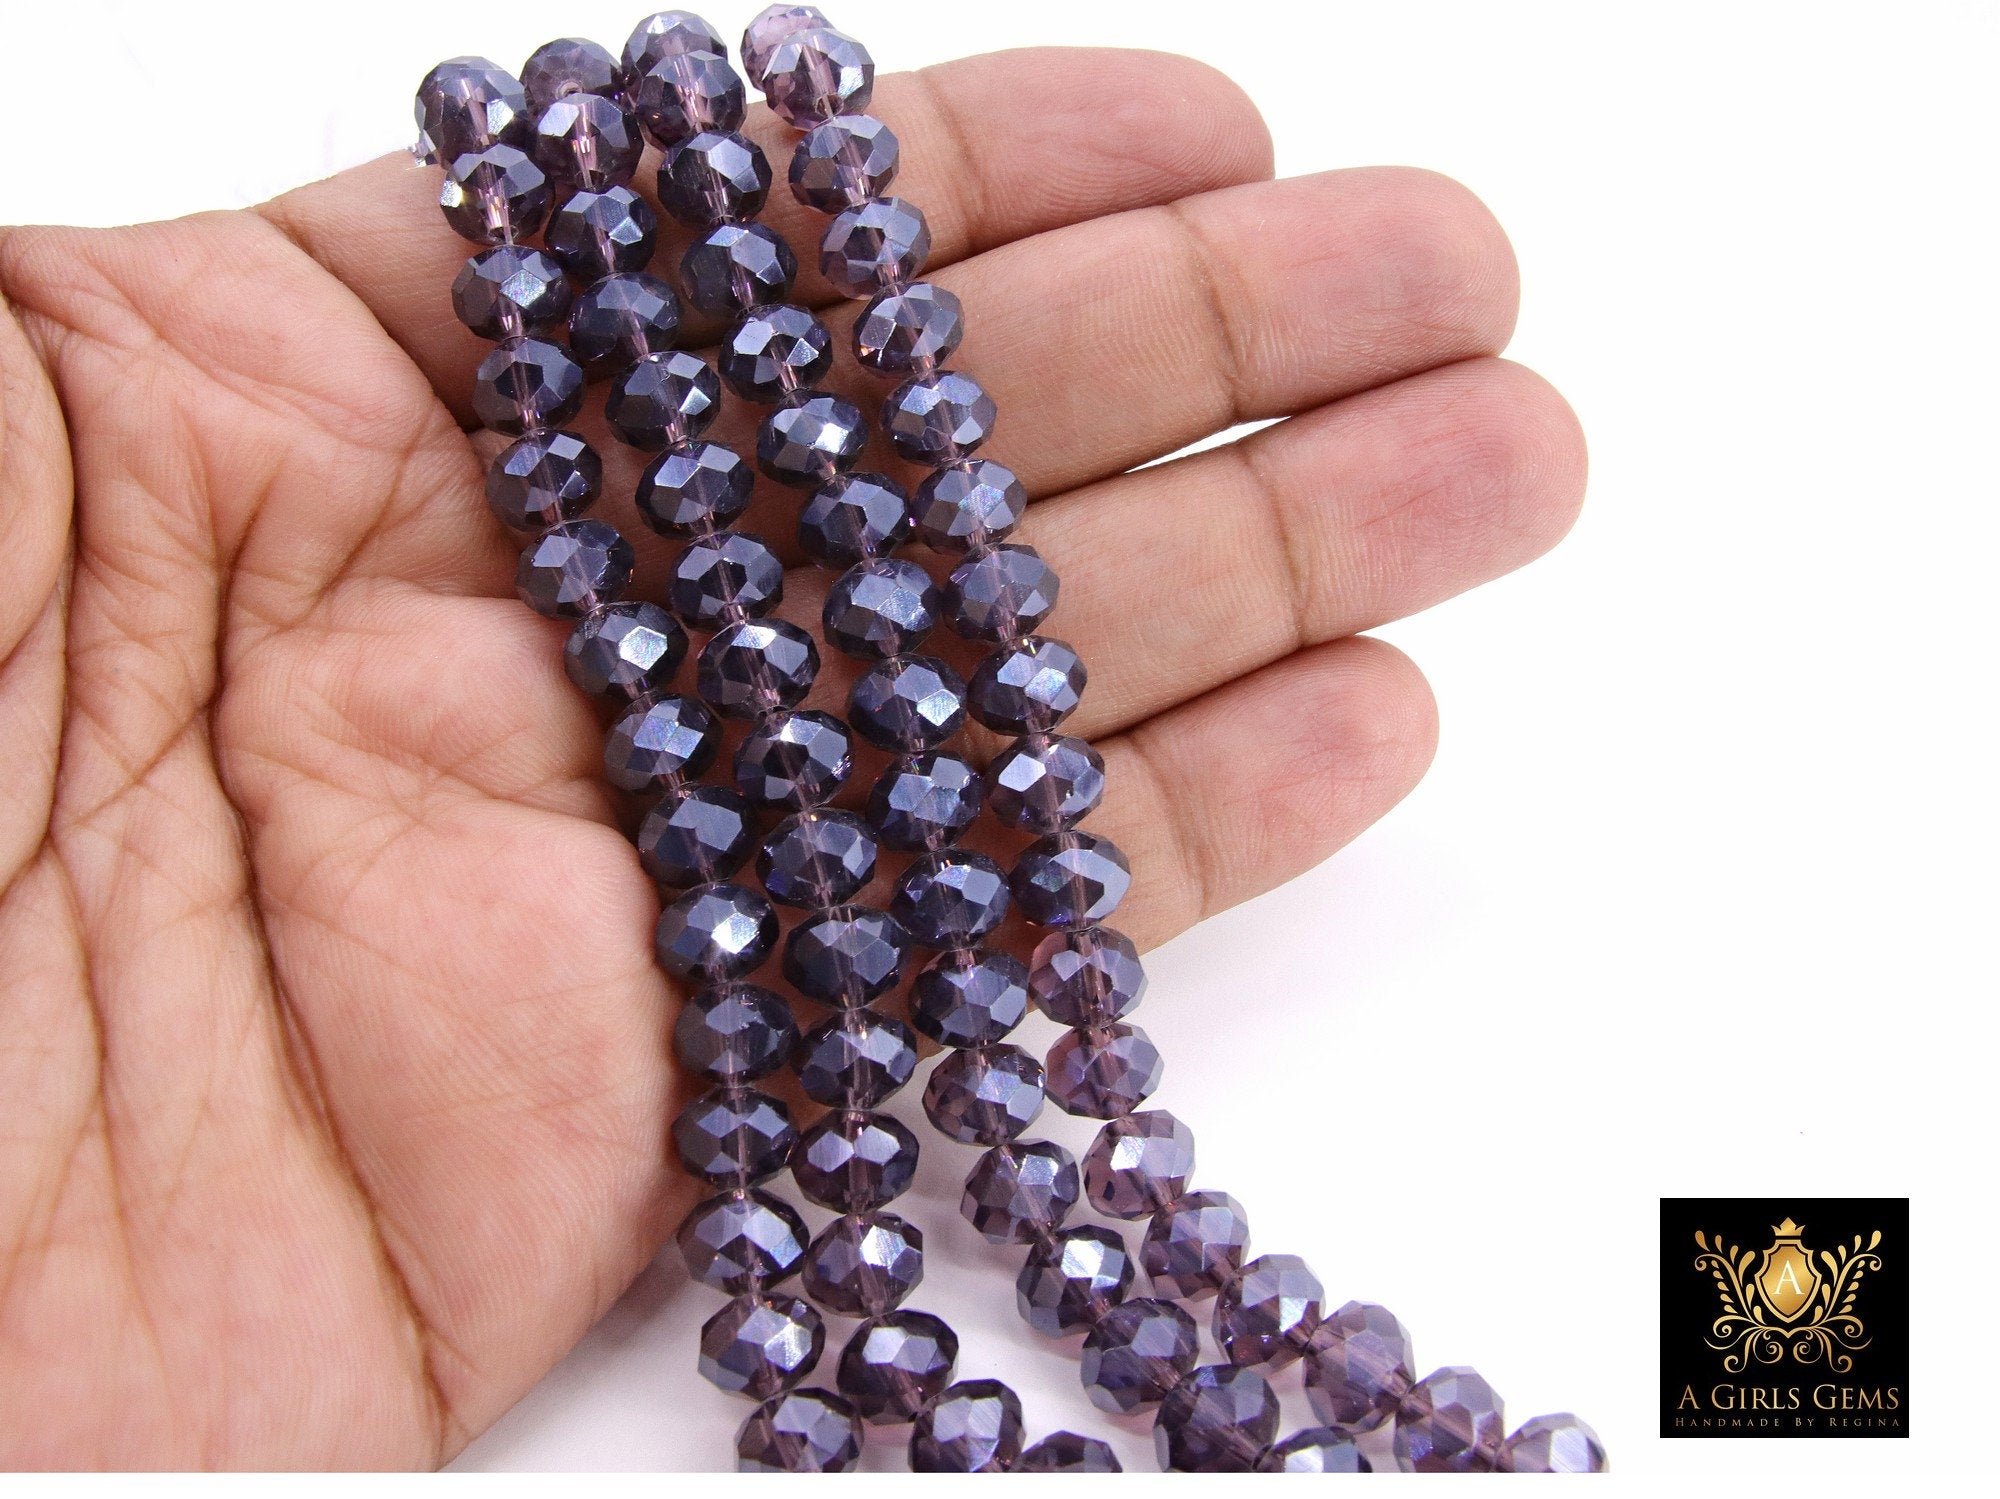 Purple Crystal Beads, Shimmery Faceted AB Crystal Rondelle Beads BS #178, sizes 8 x 6 mm, 16 inch Strands